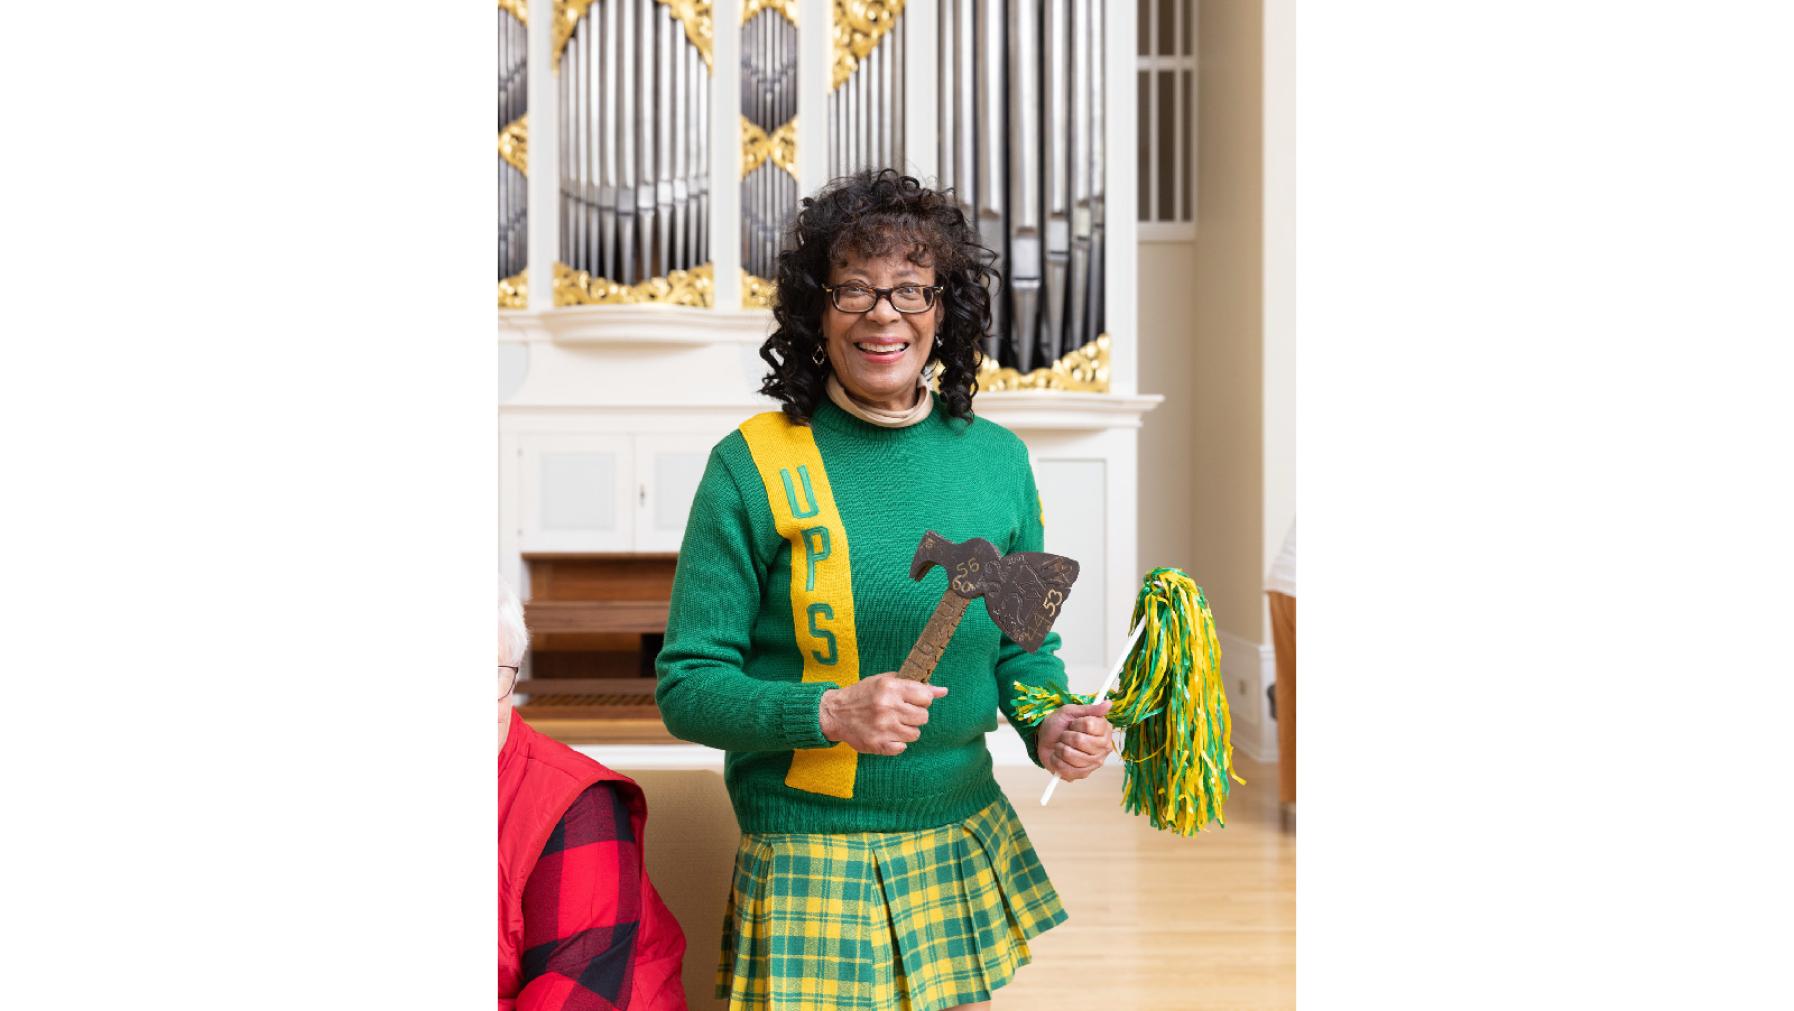 An alumna from the Class of 1973 dressed in a green and gold cheerleading uniform and holding the hatchet at Summer Reunion Weekend 2023.